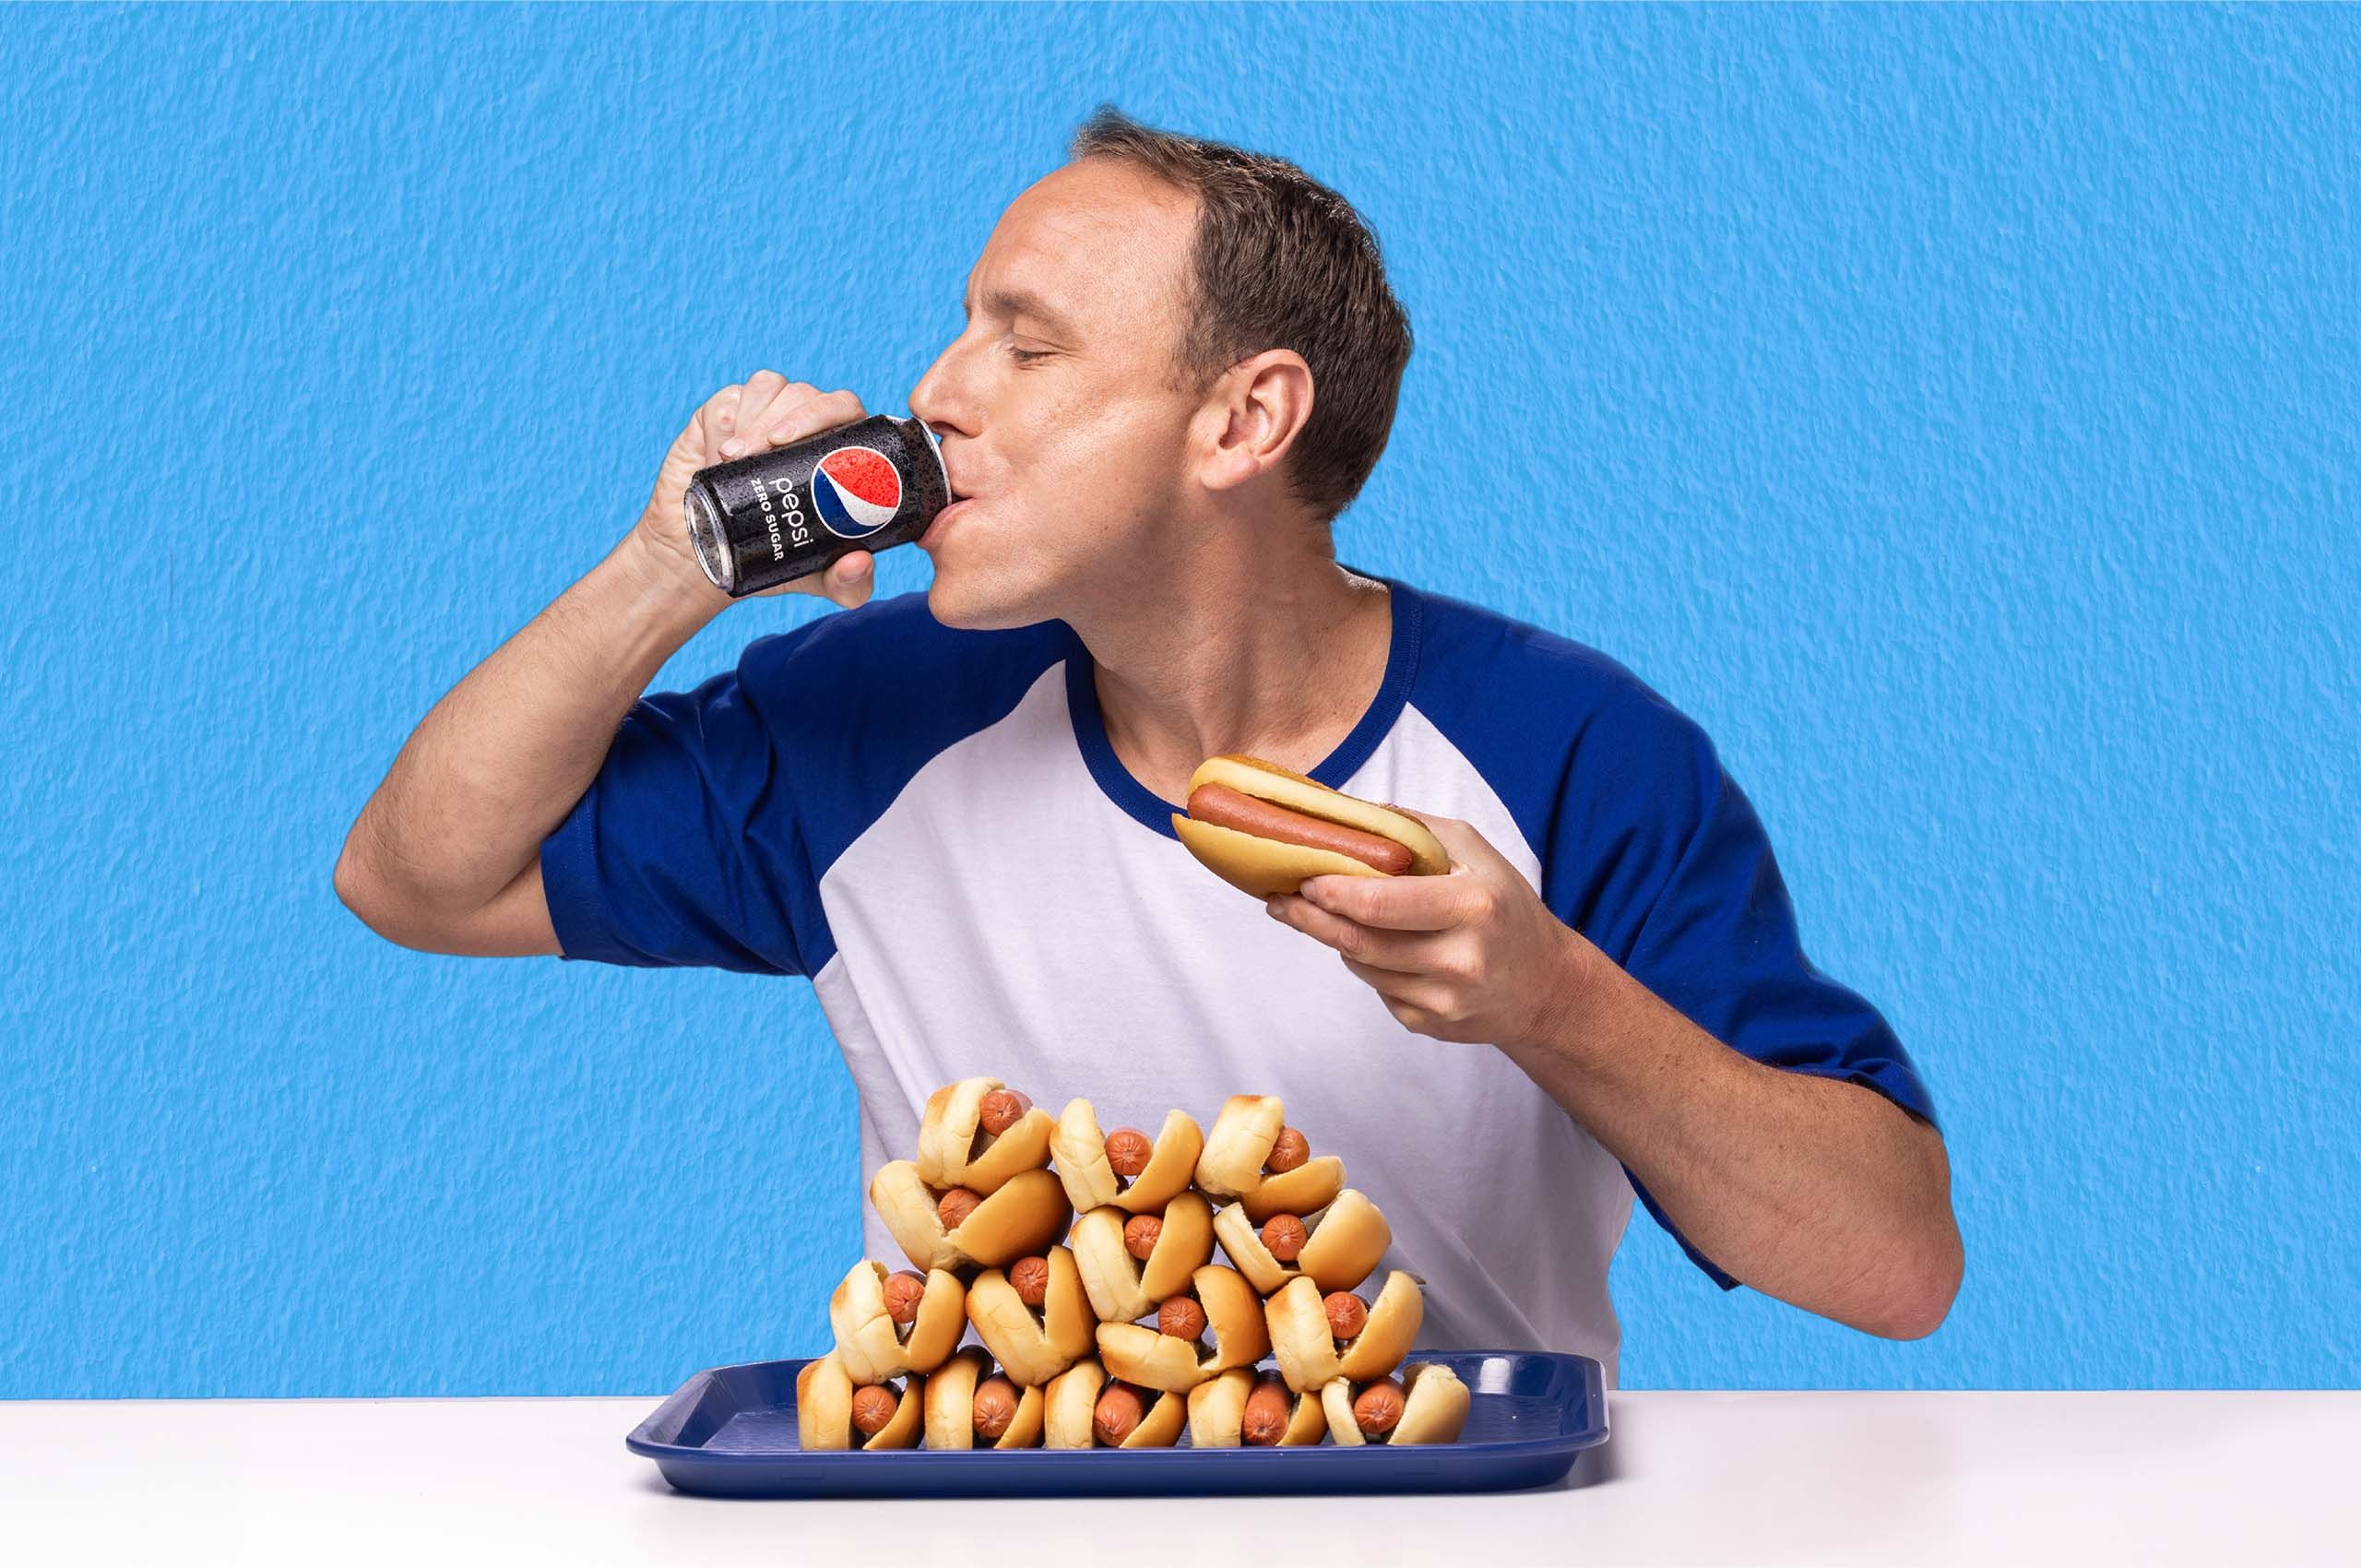 Competitive Eater Joey Chesnut for Pepsi by Chicago celebrity advertising photographer Jeff Schear